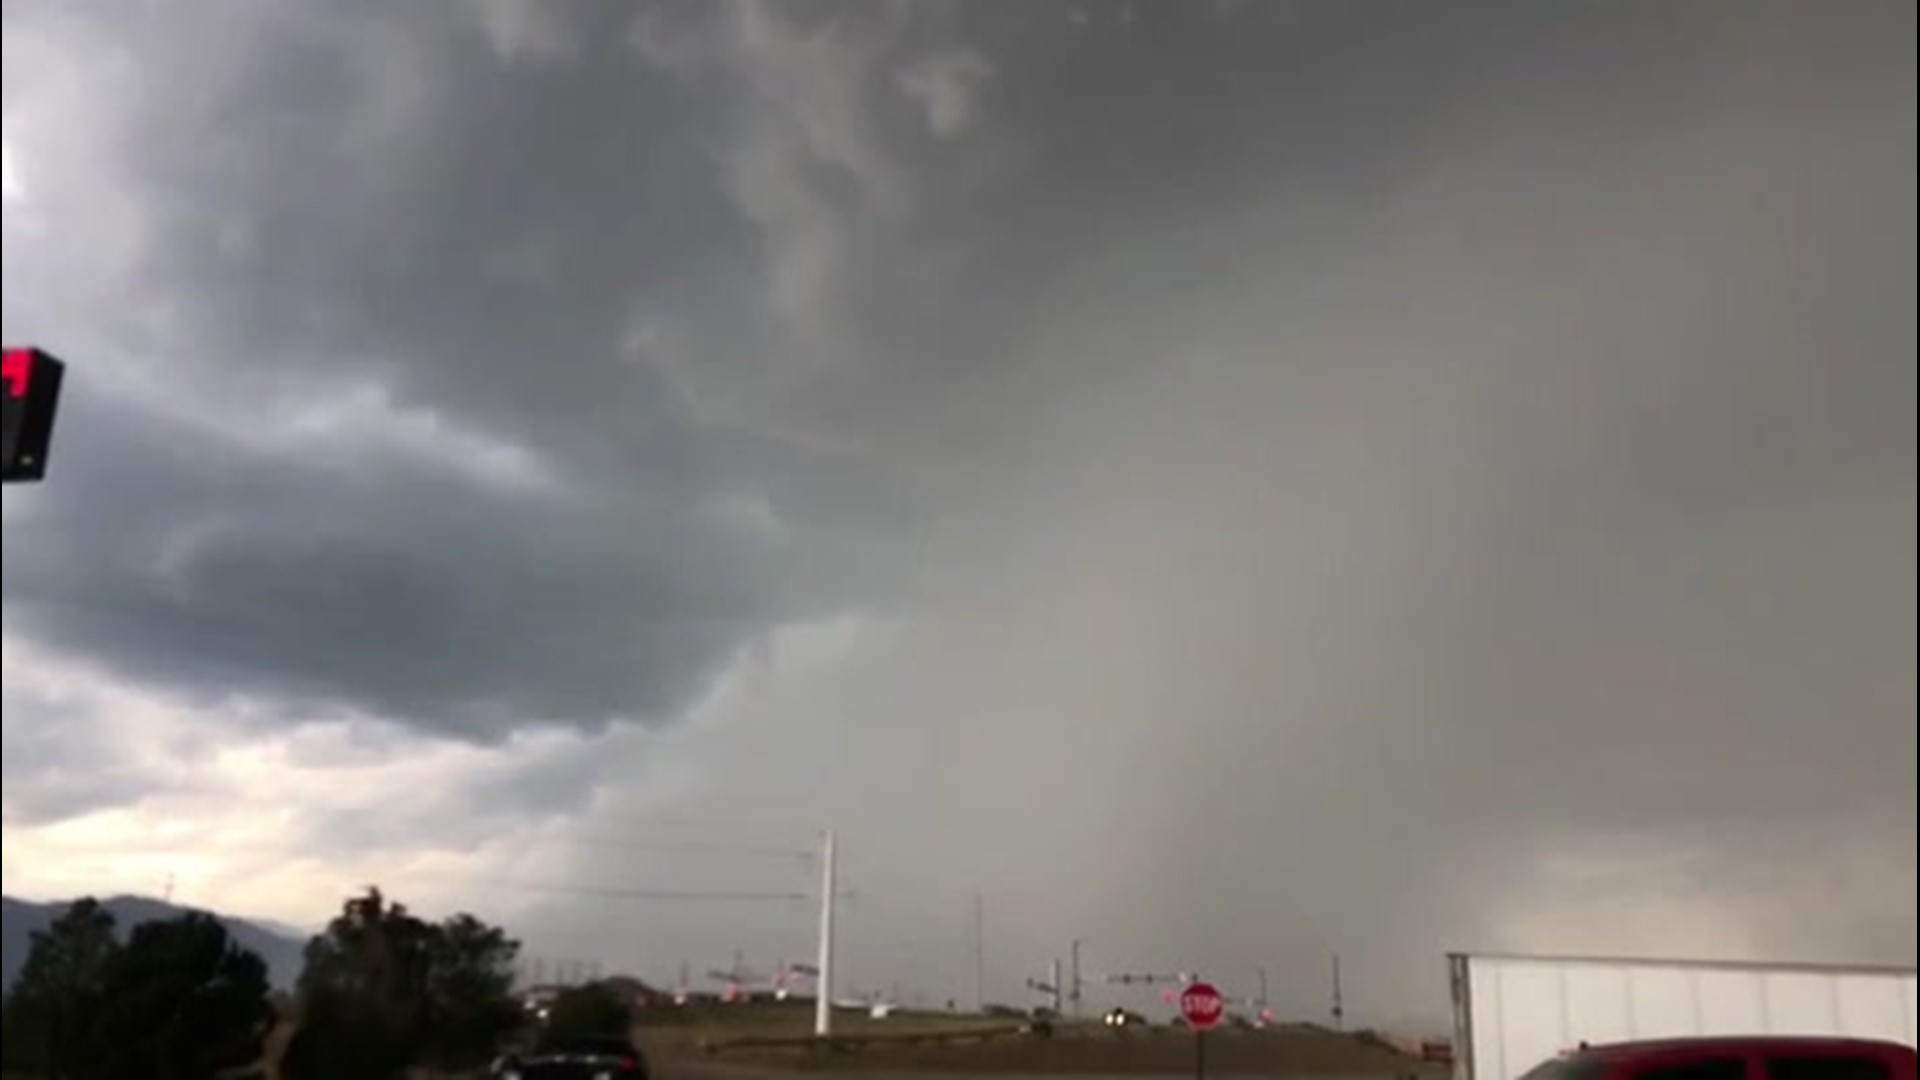 Reed Timmer captured intense footage of hail on I-25 near Colorado Springs, Colorado, on Aug. 5.